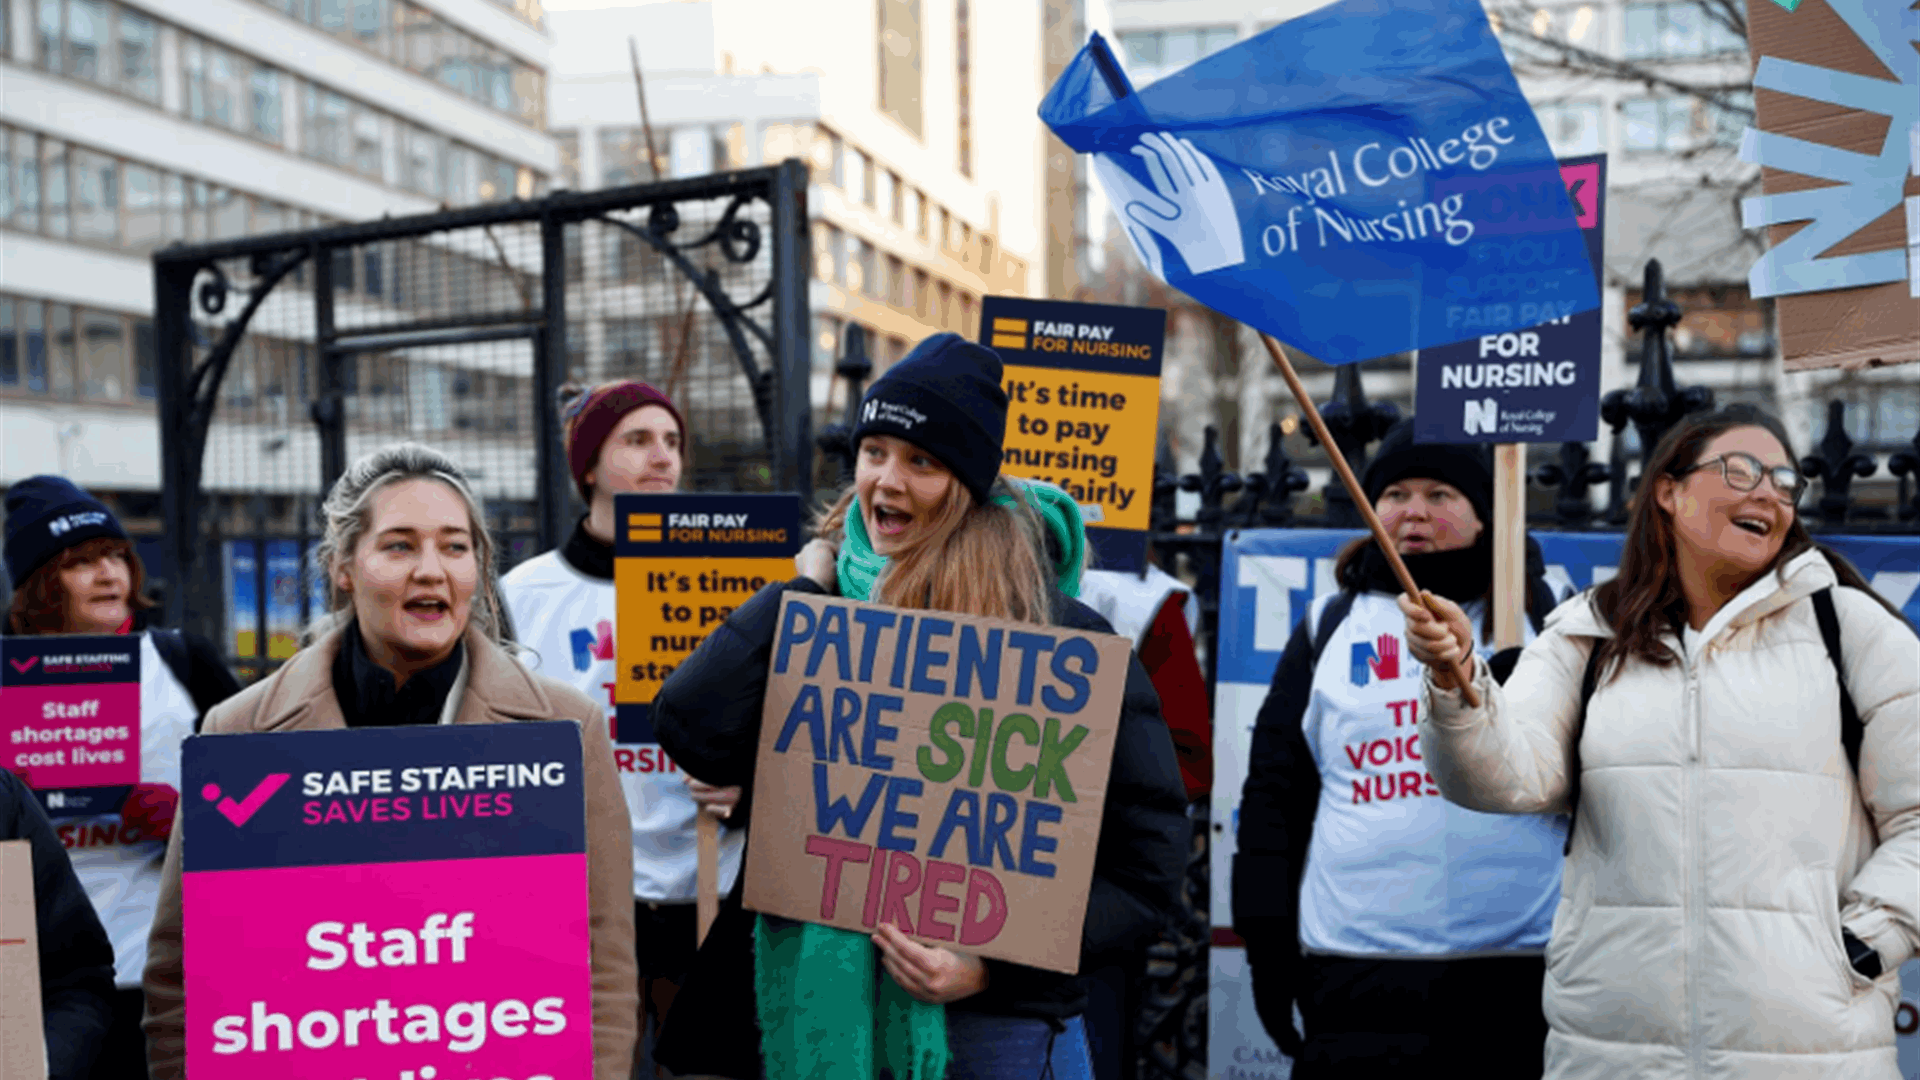 British workers stage largest strike in history of health service